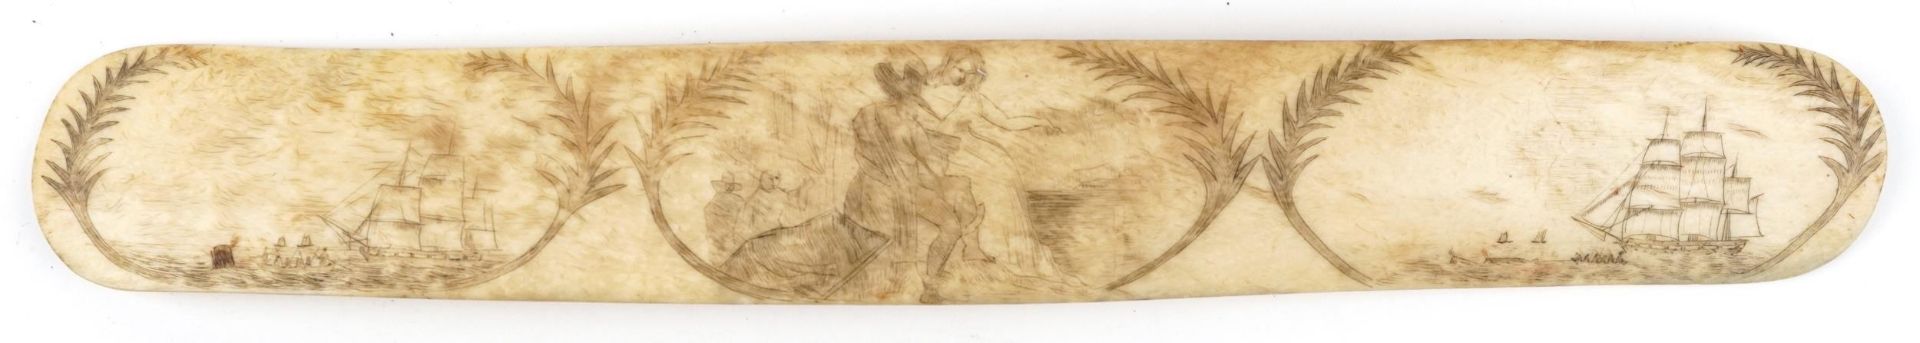 Antique sailor's scrimshaw whale bone page turner carved with figures and rigged ship, 36cm wide :